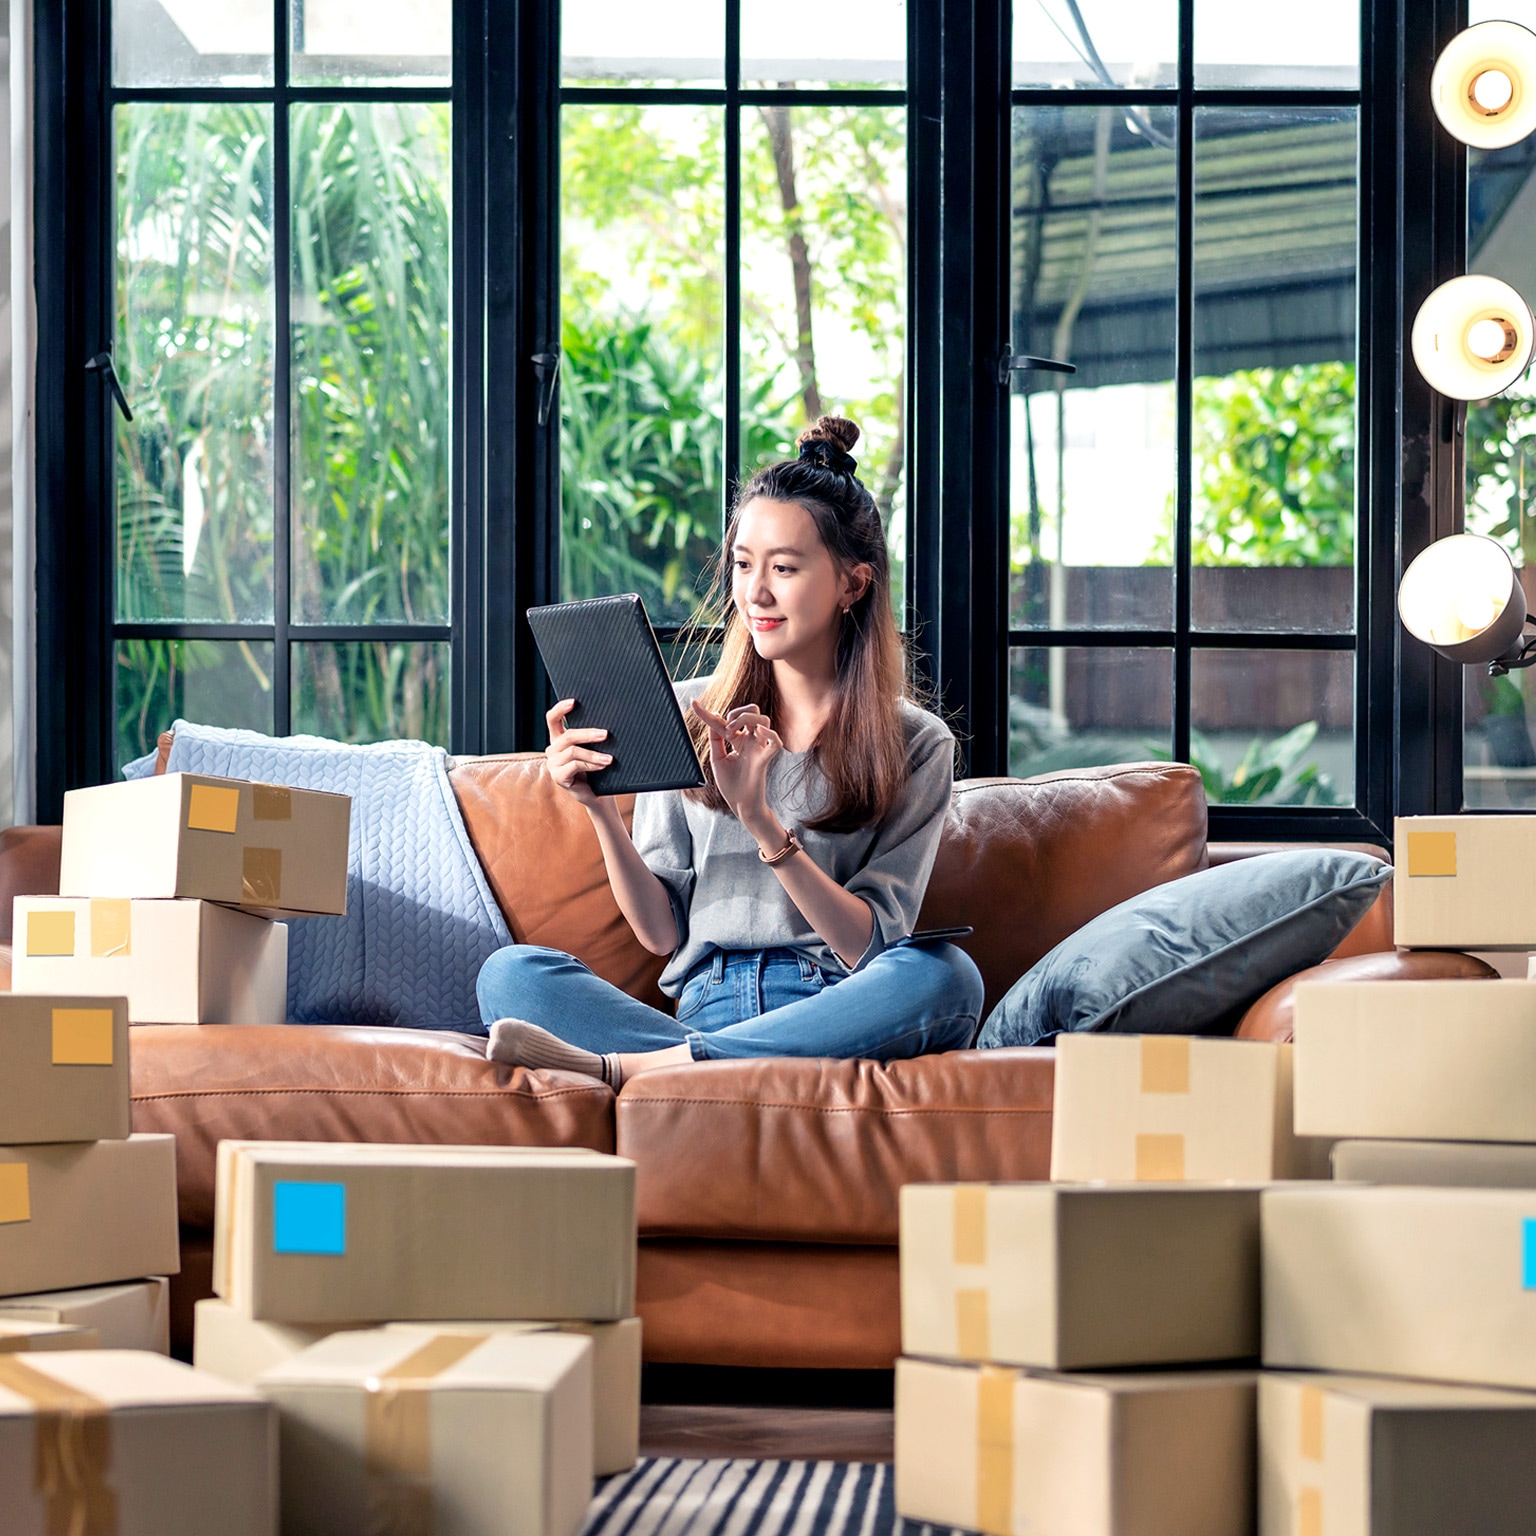 E-commerce is entering a new phase in Southeast Asia. Are logistics players prepared? – McKinsey